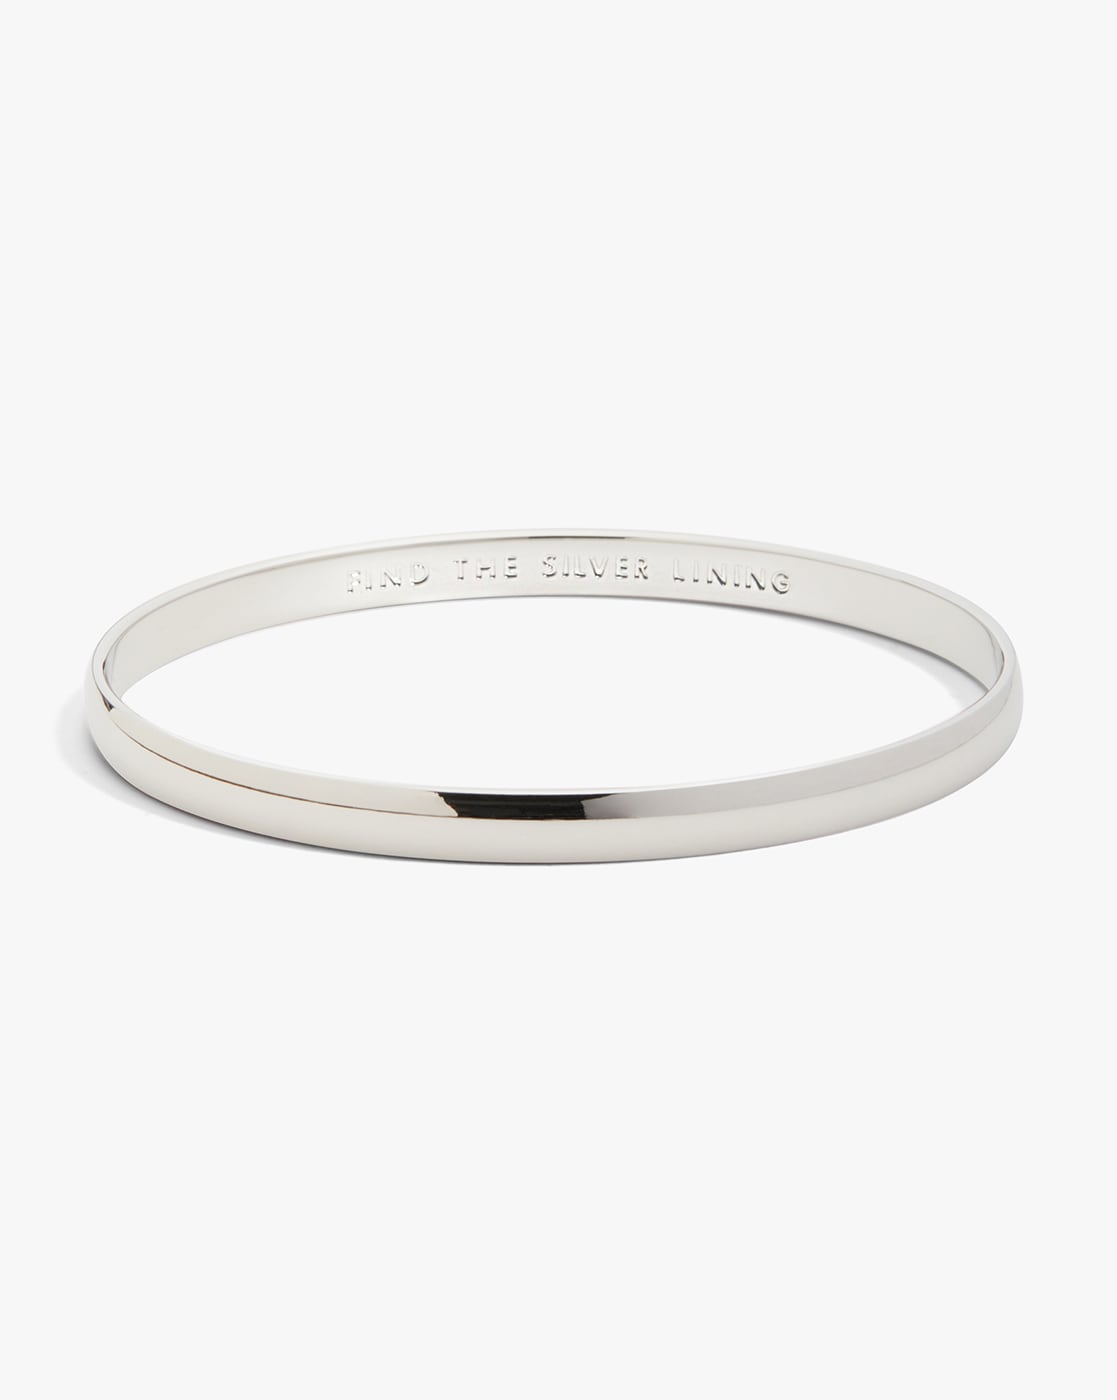 Kate Spade Find The Silver Lining Idiom Bangle Bracelet | Fashion Bracelets  | Jewelry & Watches | Shop The Exchange